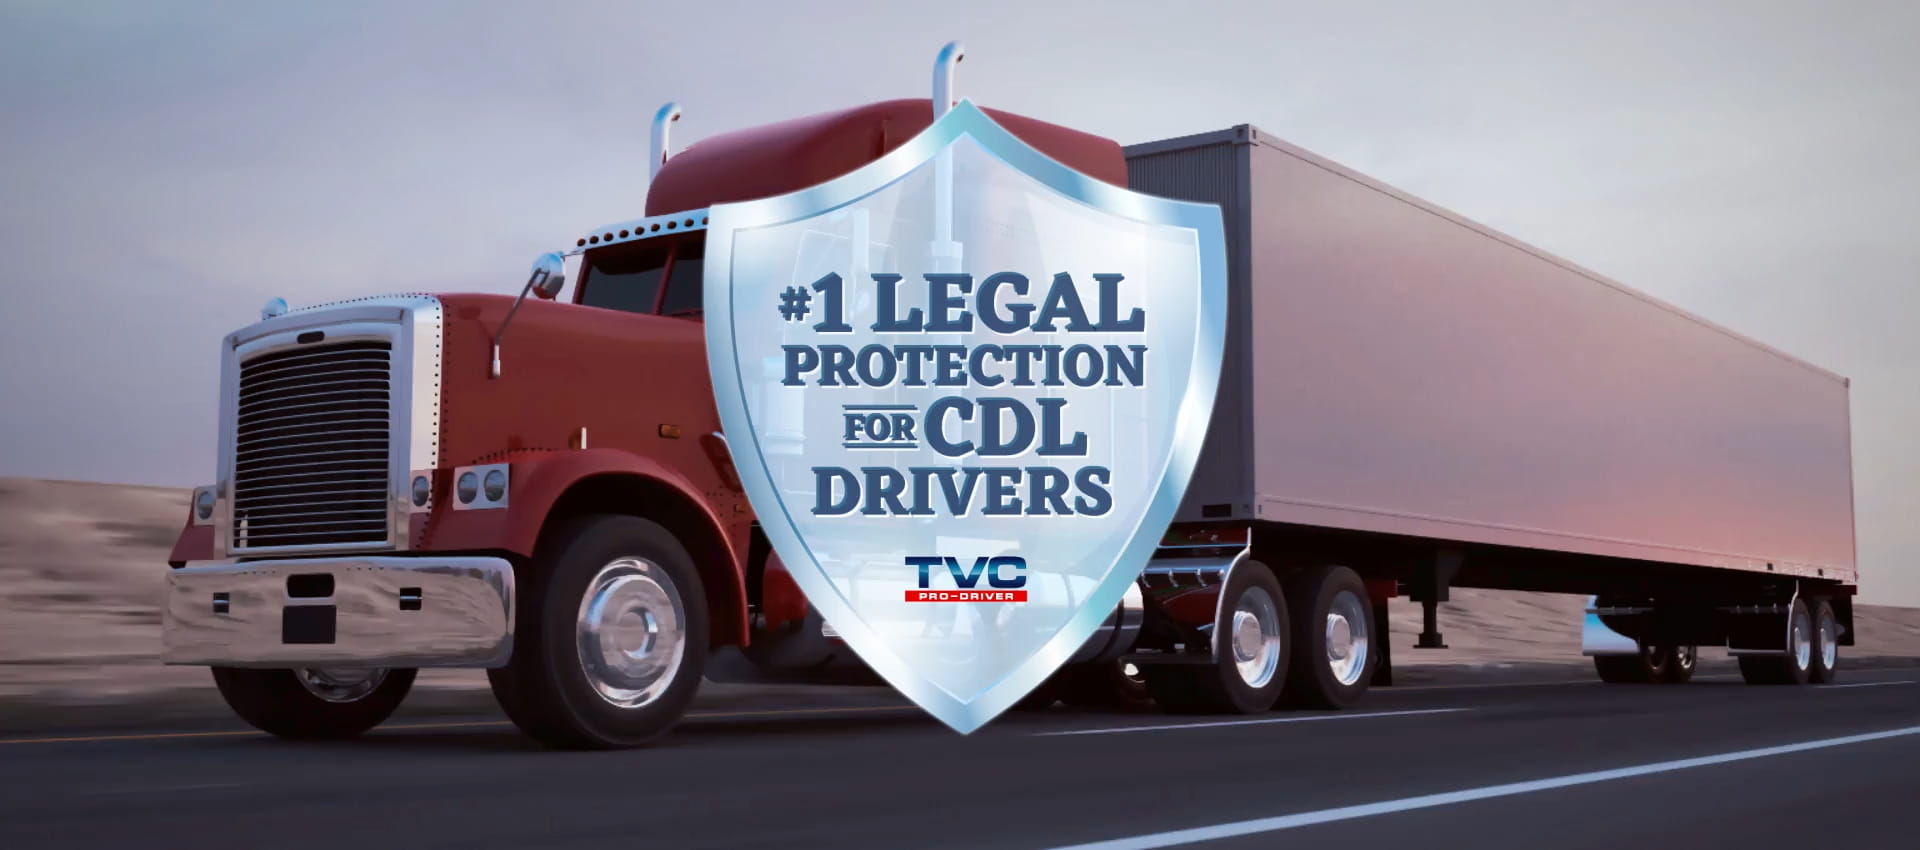 Home - TVC Pro-Driver - America's #1 CDL protection plan